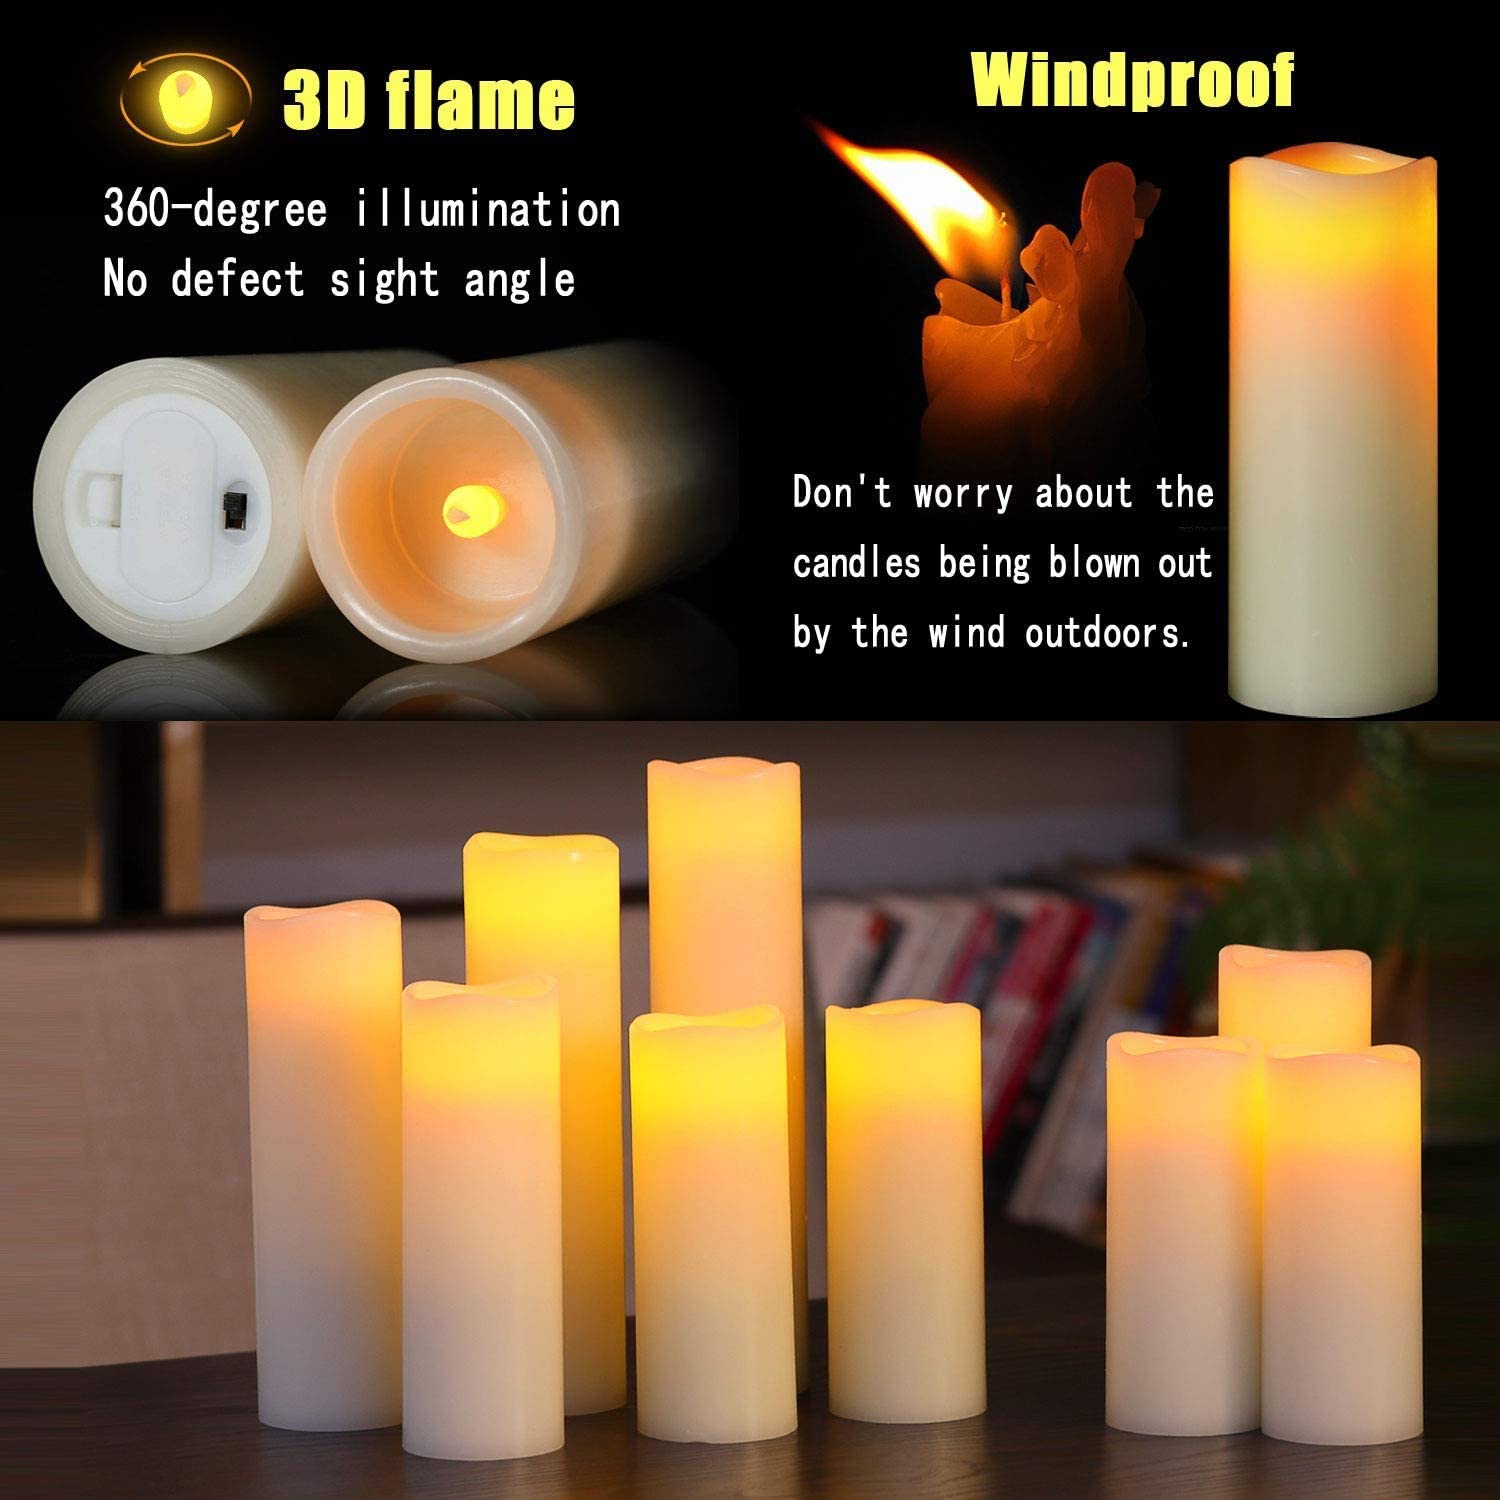 Ivory Real Wax Battery Candles with Remote Timer KUNOVA Flameless Candles TM Led Candles Set of 9 H 4 5 6 7 8 9 xD 2.2 